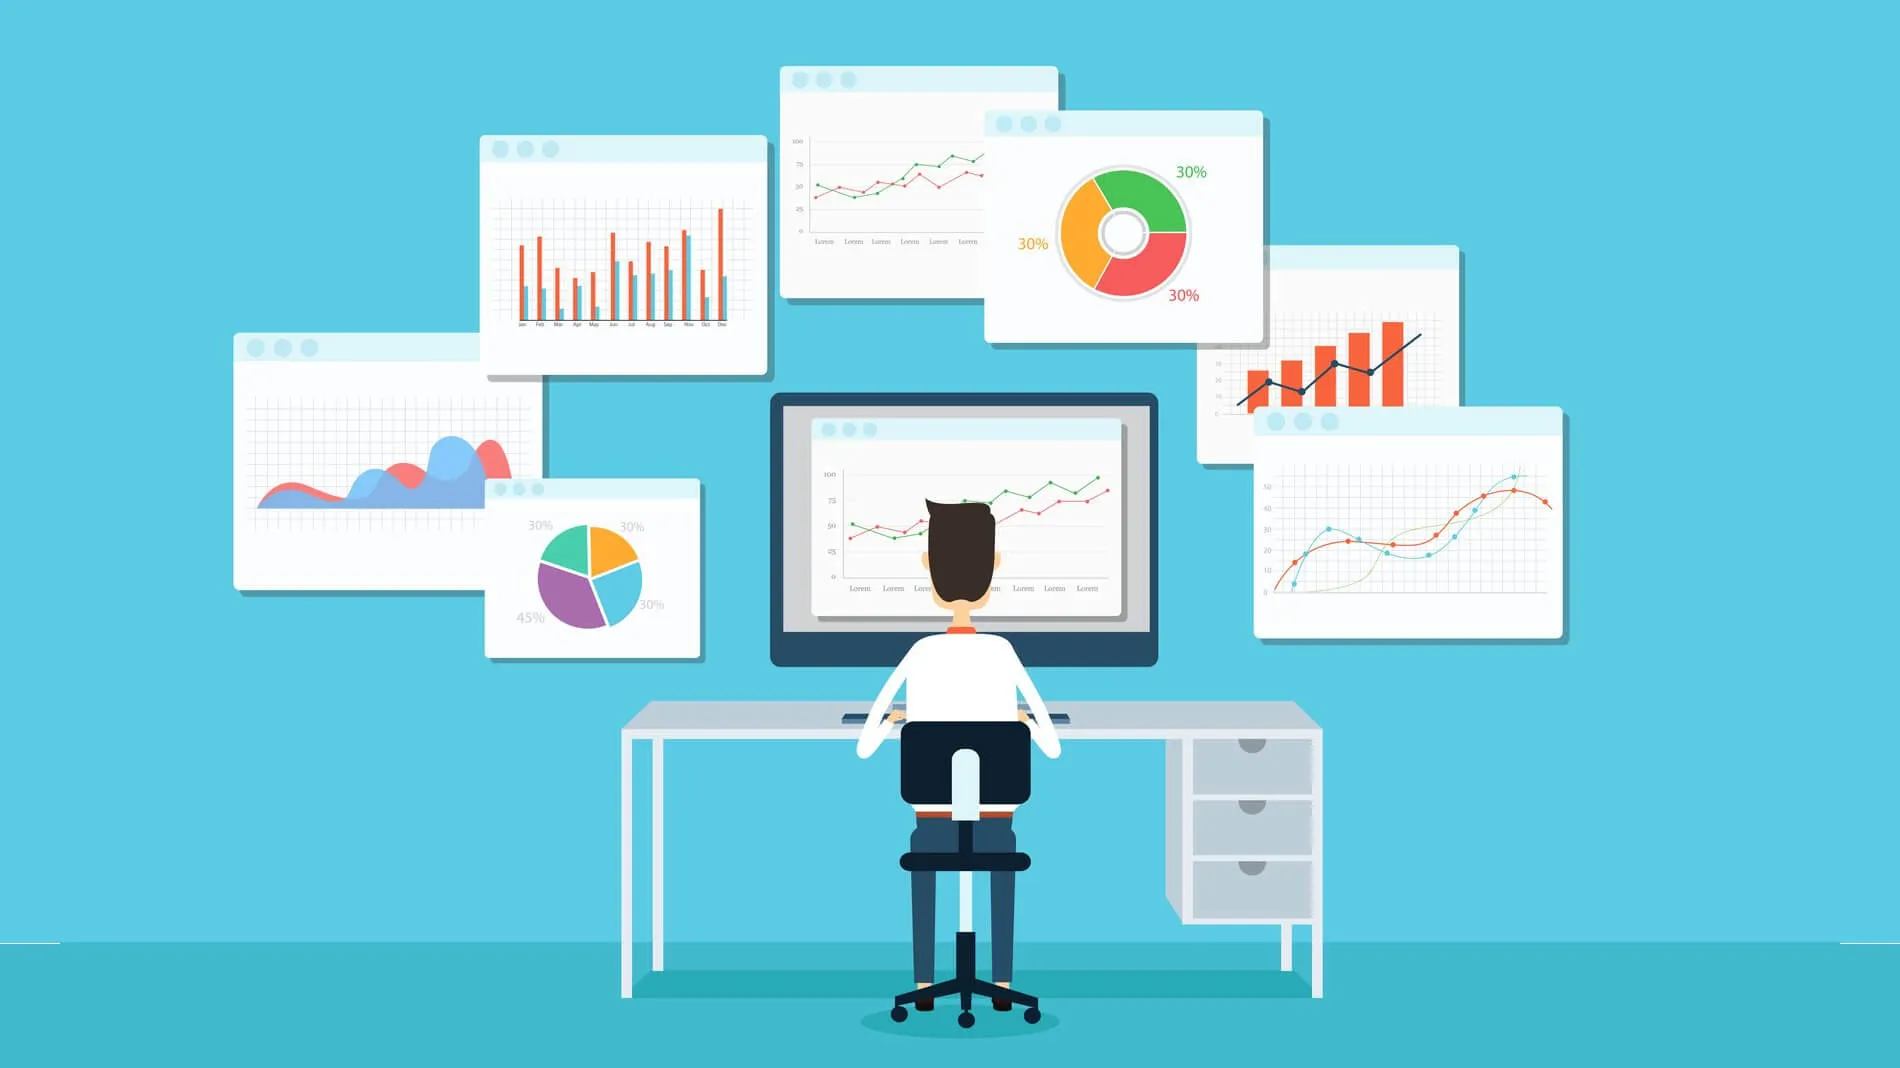 many businesses have their own data analysis teams or hire consulting - analysis companiMany businesses have their own data analysis teams or hire consulting - analysis companies